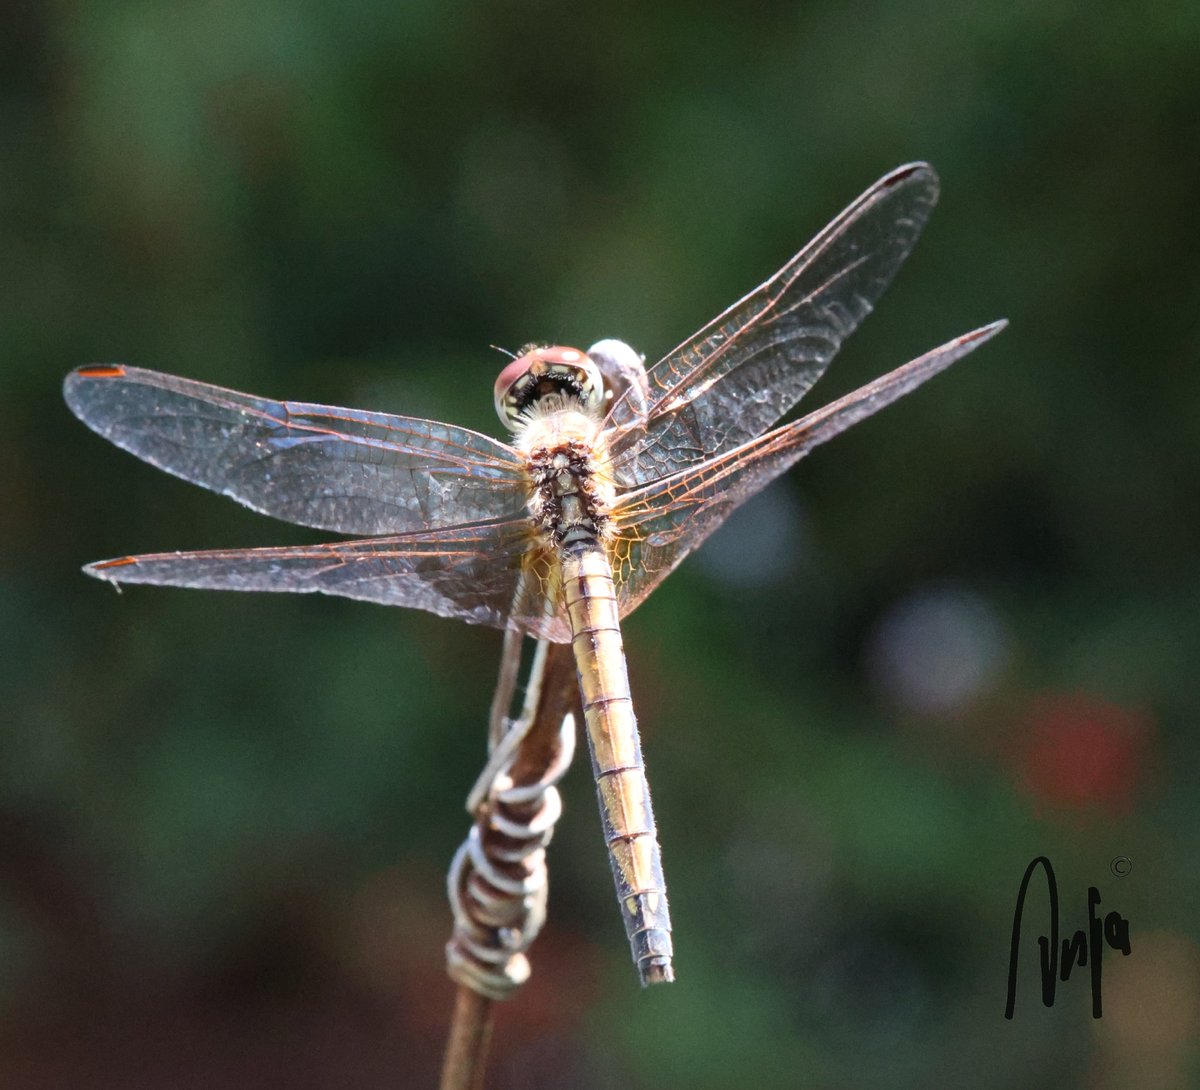 #dragonfly 
#photography #nature #outdoors #garden #goedemorgen #insect #CloseUp #libelle
#Francistown #Botswana #Africa